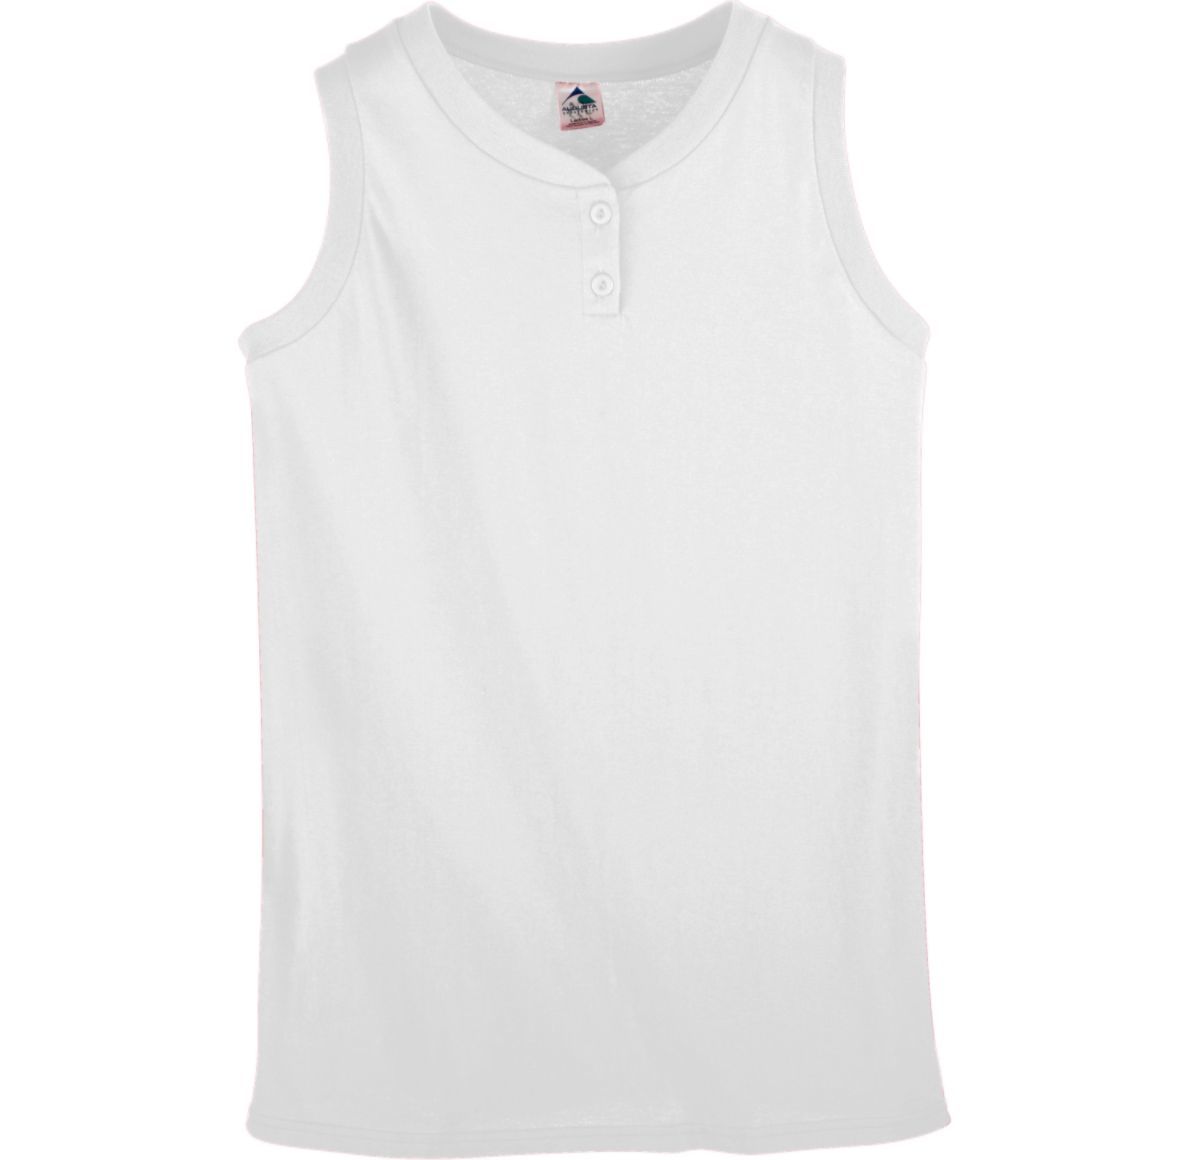 Augusta Sportswear Ladies Sleeveless Two Button Softball Jersey in White  -Part of the Ladies, Ladies-Jersey, Augusta-Products, Softball, Shirts product lines at KanaleyCreations.com